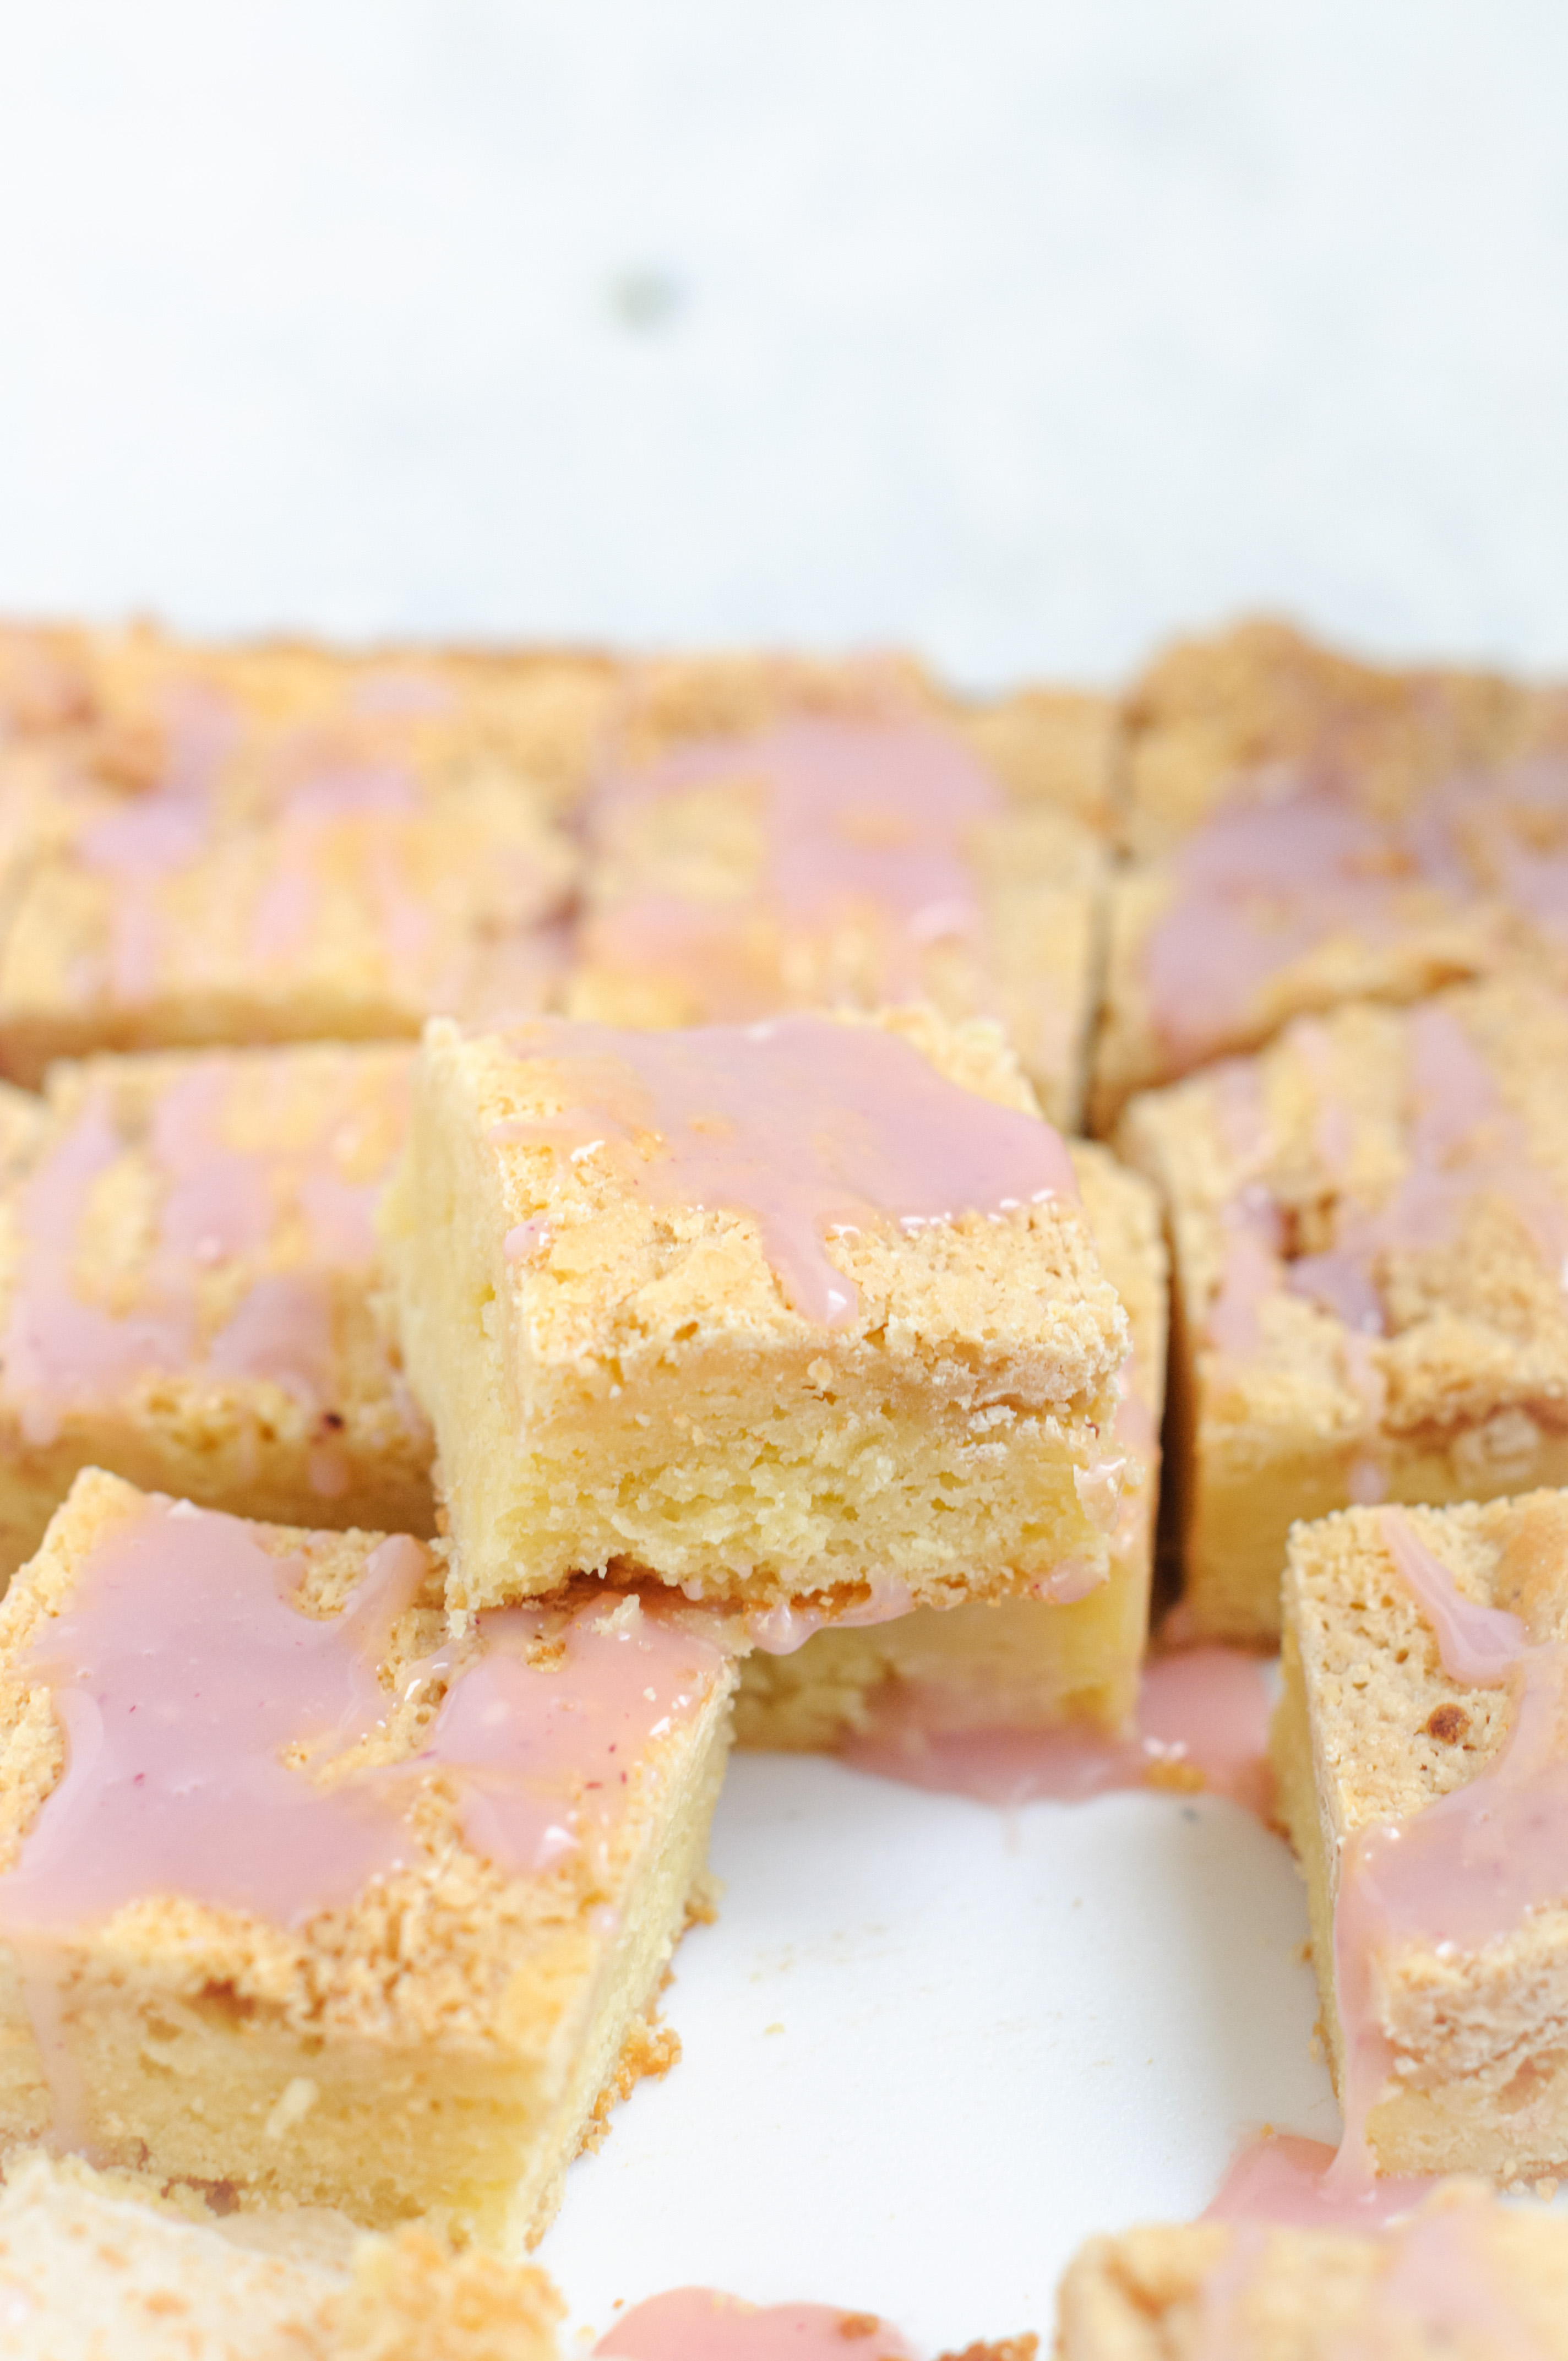 buttery, chewy and sweet with a decadent strawberry drizzle. Probably, the fudgiest, richest, most delicious white chocolate brownies out there.